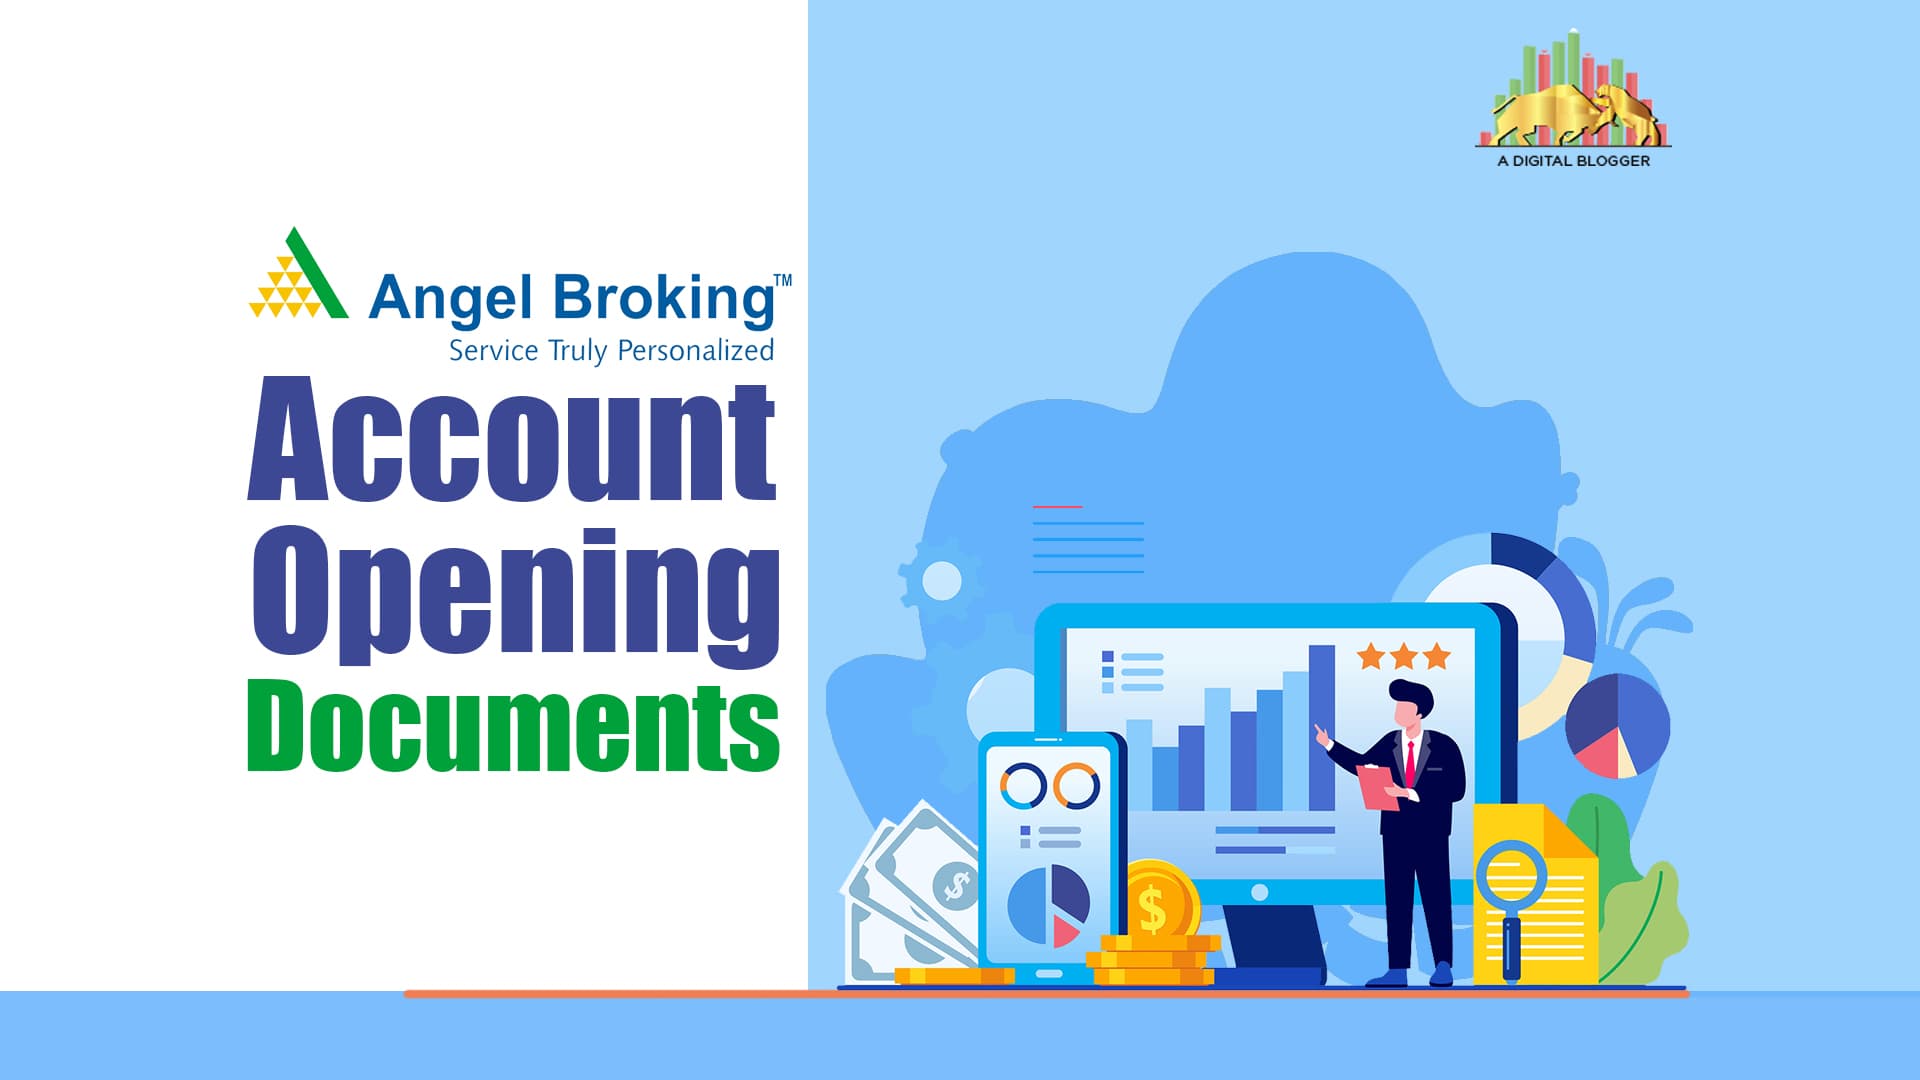 Angel Broking Account Opening Documents | List of Docs ...